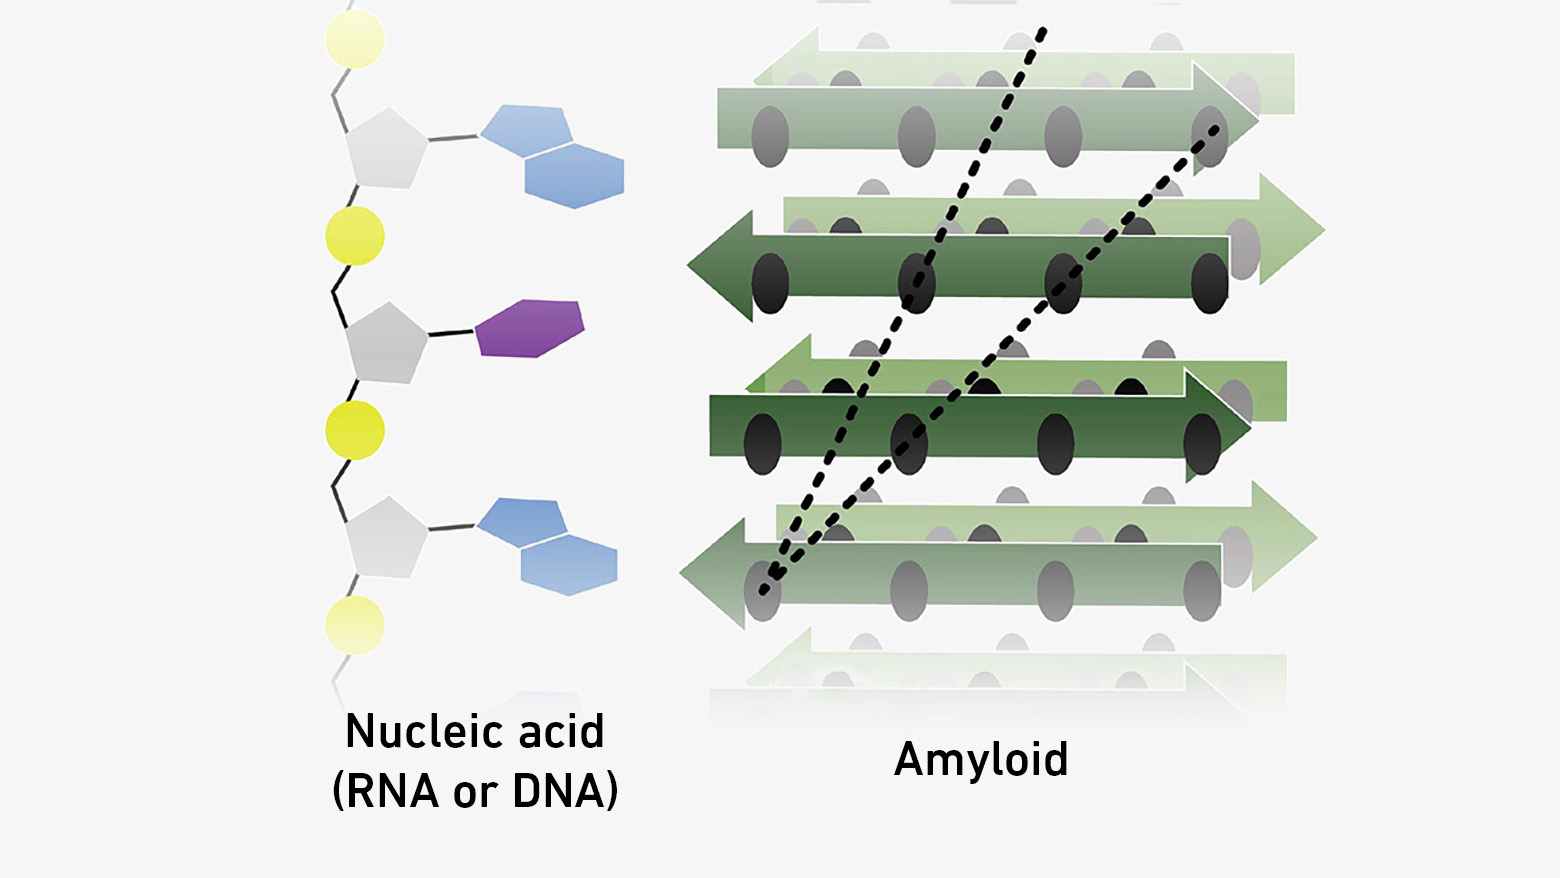 Depiction of nucleic acid (left) and depiction of amyloid (right)